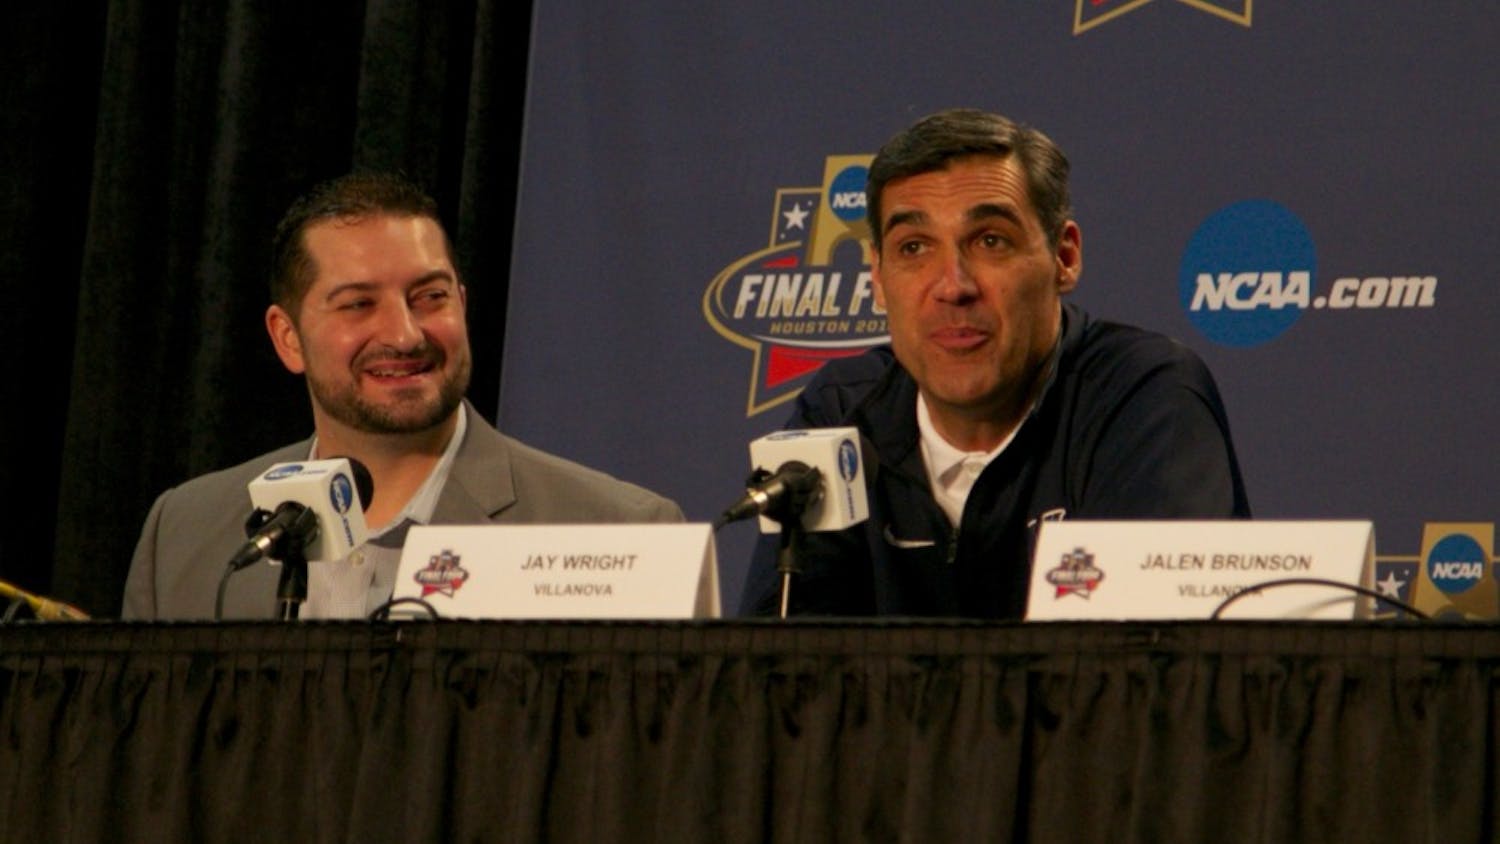 Villanova head coach Jay Wright answers questions about his coaching during a press conference on Sunday.